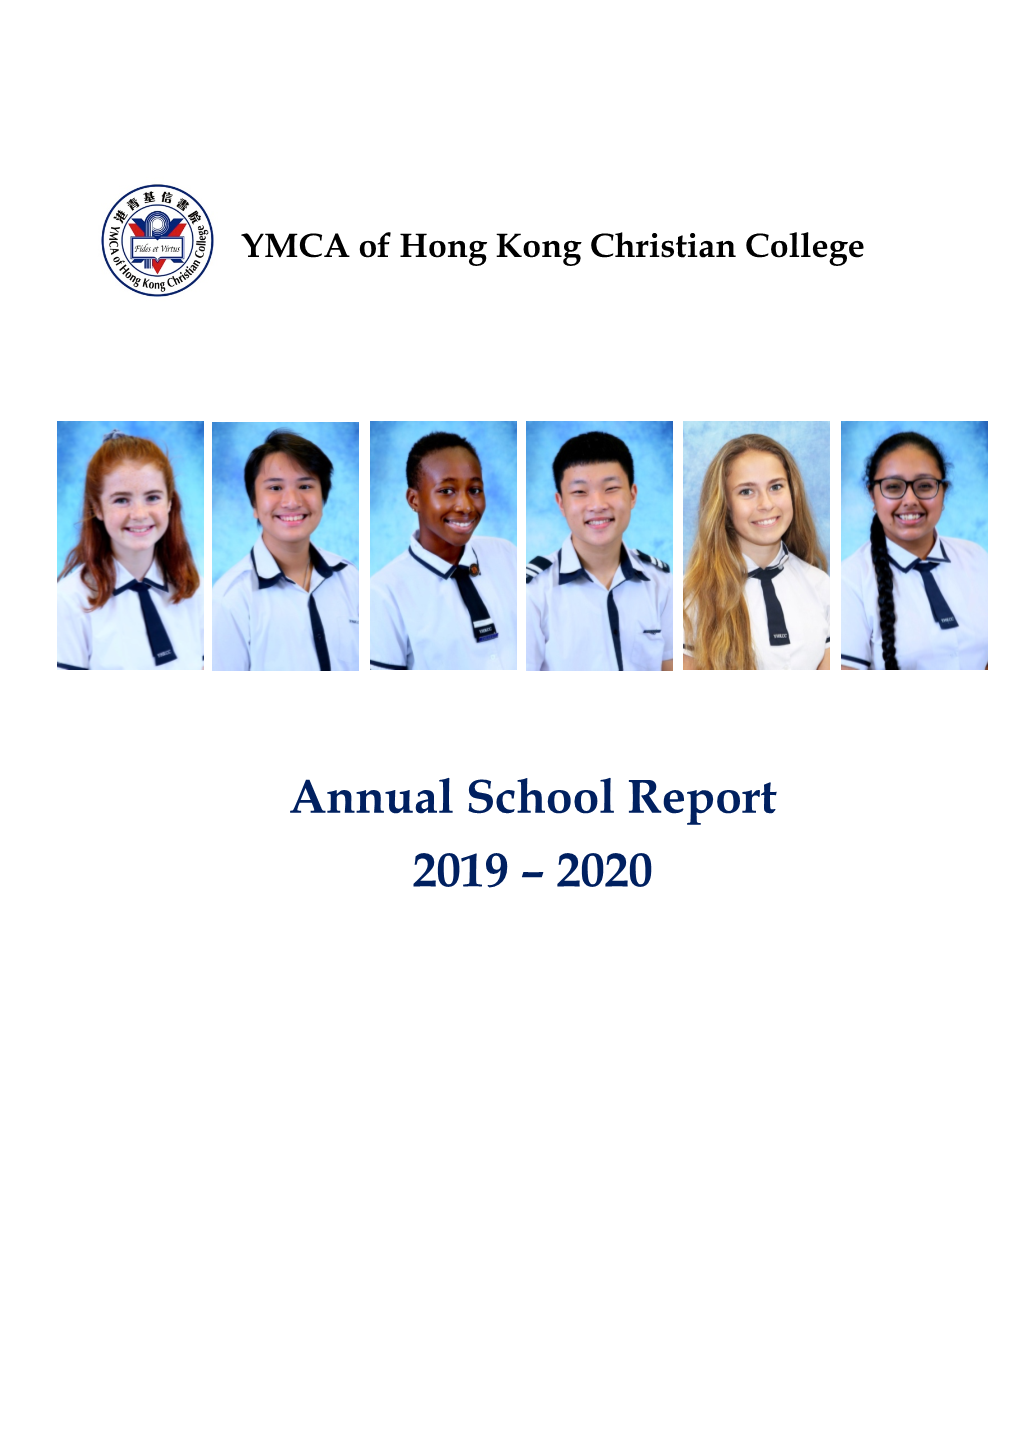 Annual School Report 2019 – 2020 Page 2